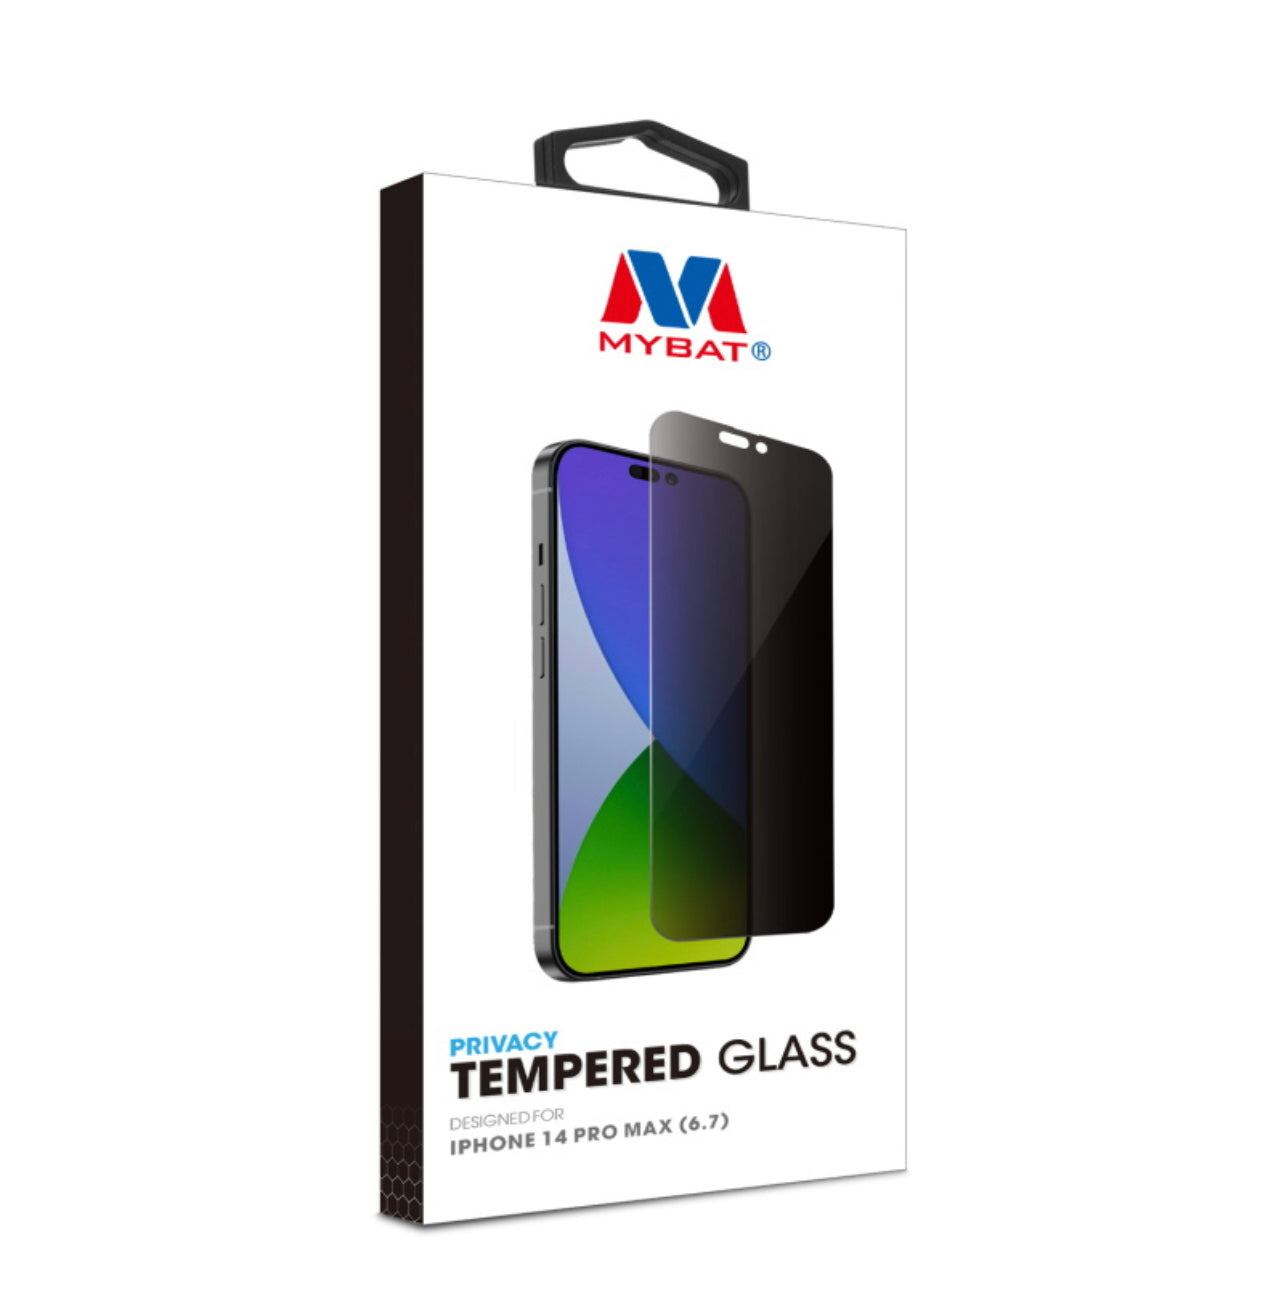 MyBat Privacy Tempered Glass Screen Protector (2.5D) for Apple iPhone 14 Pro Max (6.7) - Clear